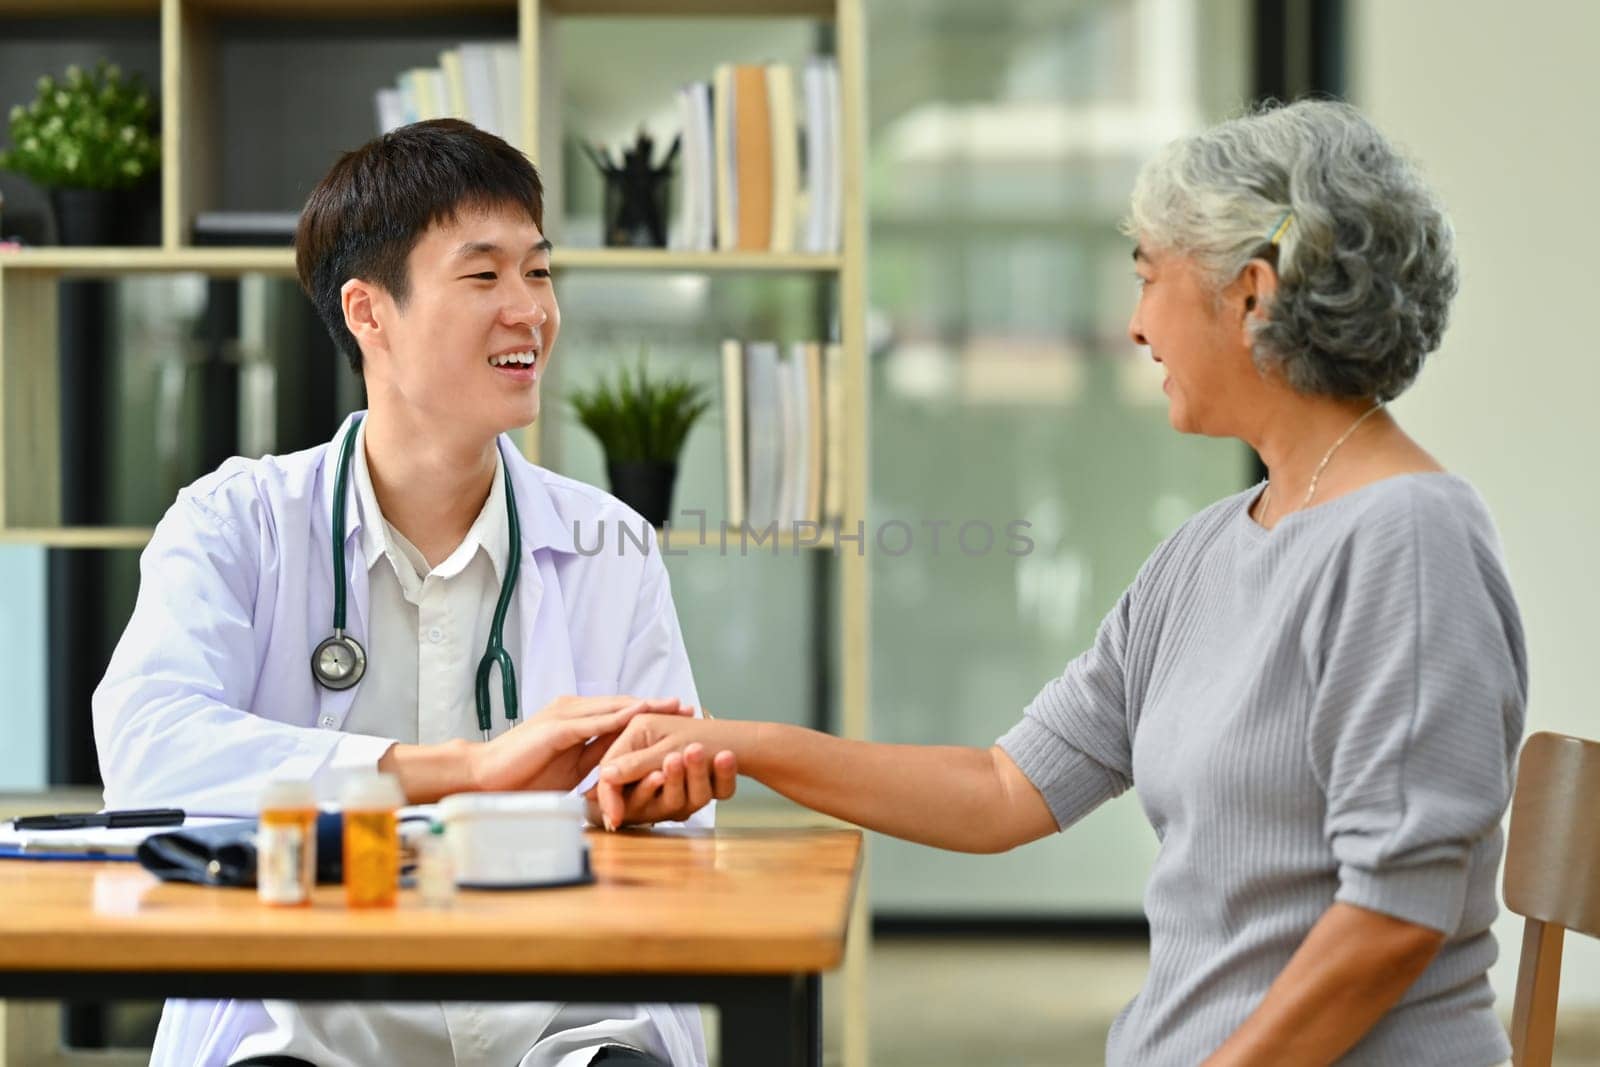 Smiling doctor in white coat holding hand, supporting senior female patient. Medical healthcare concept.